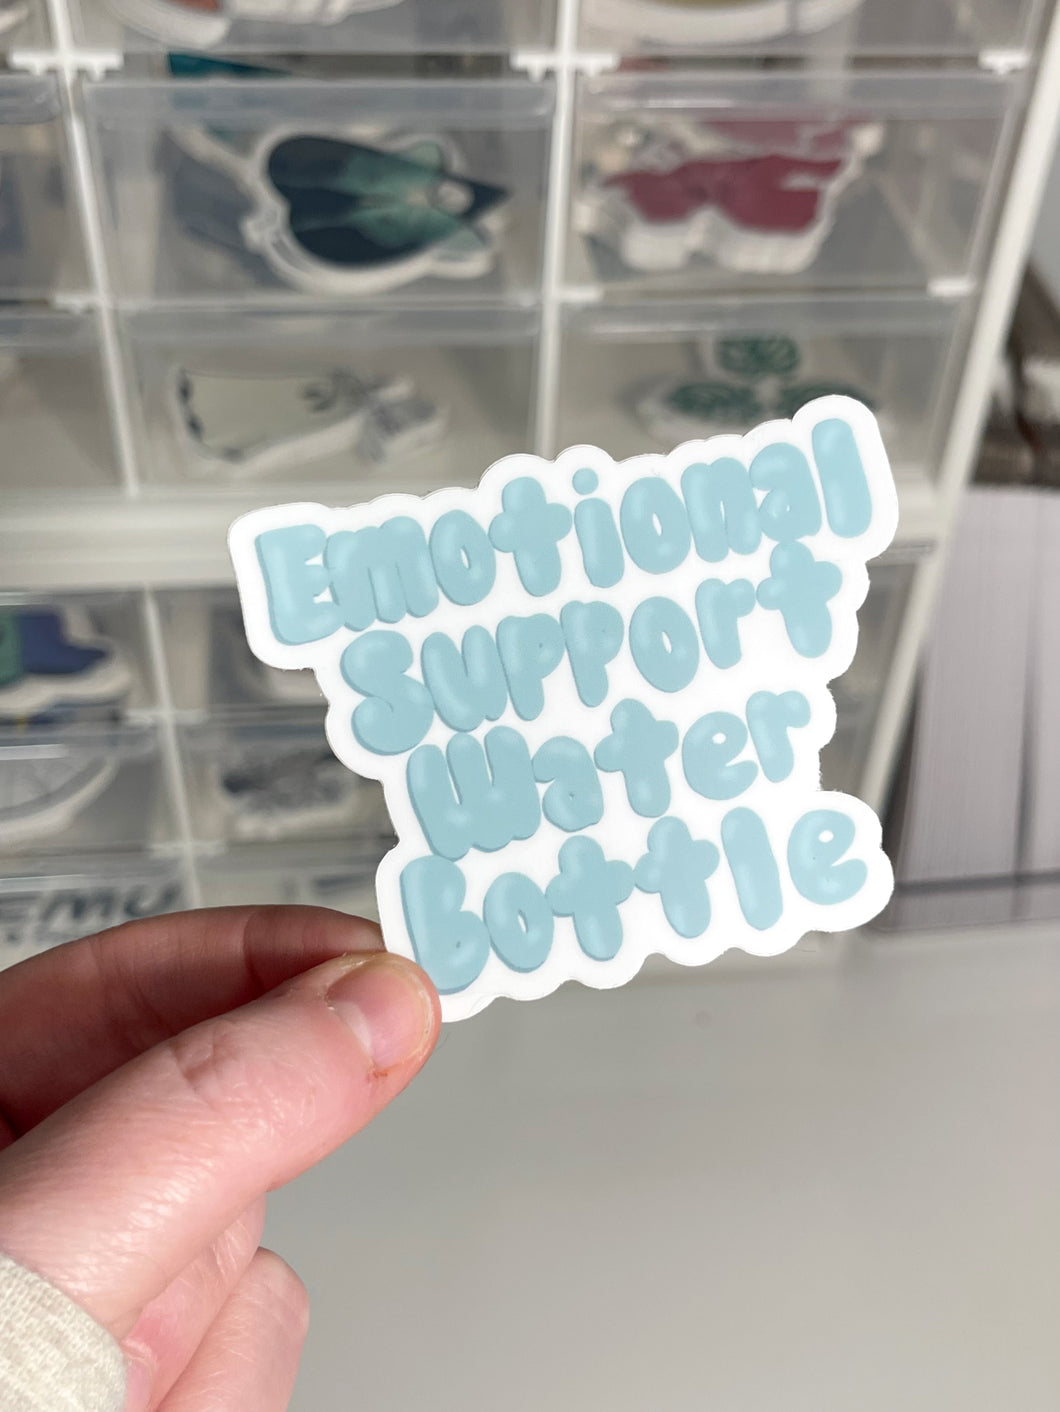 Emotional support